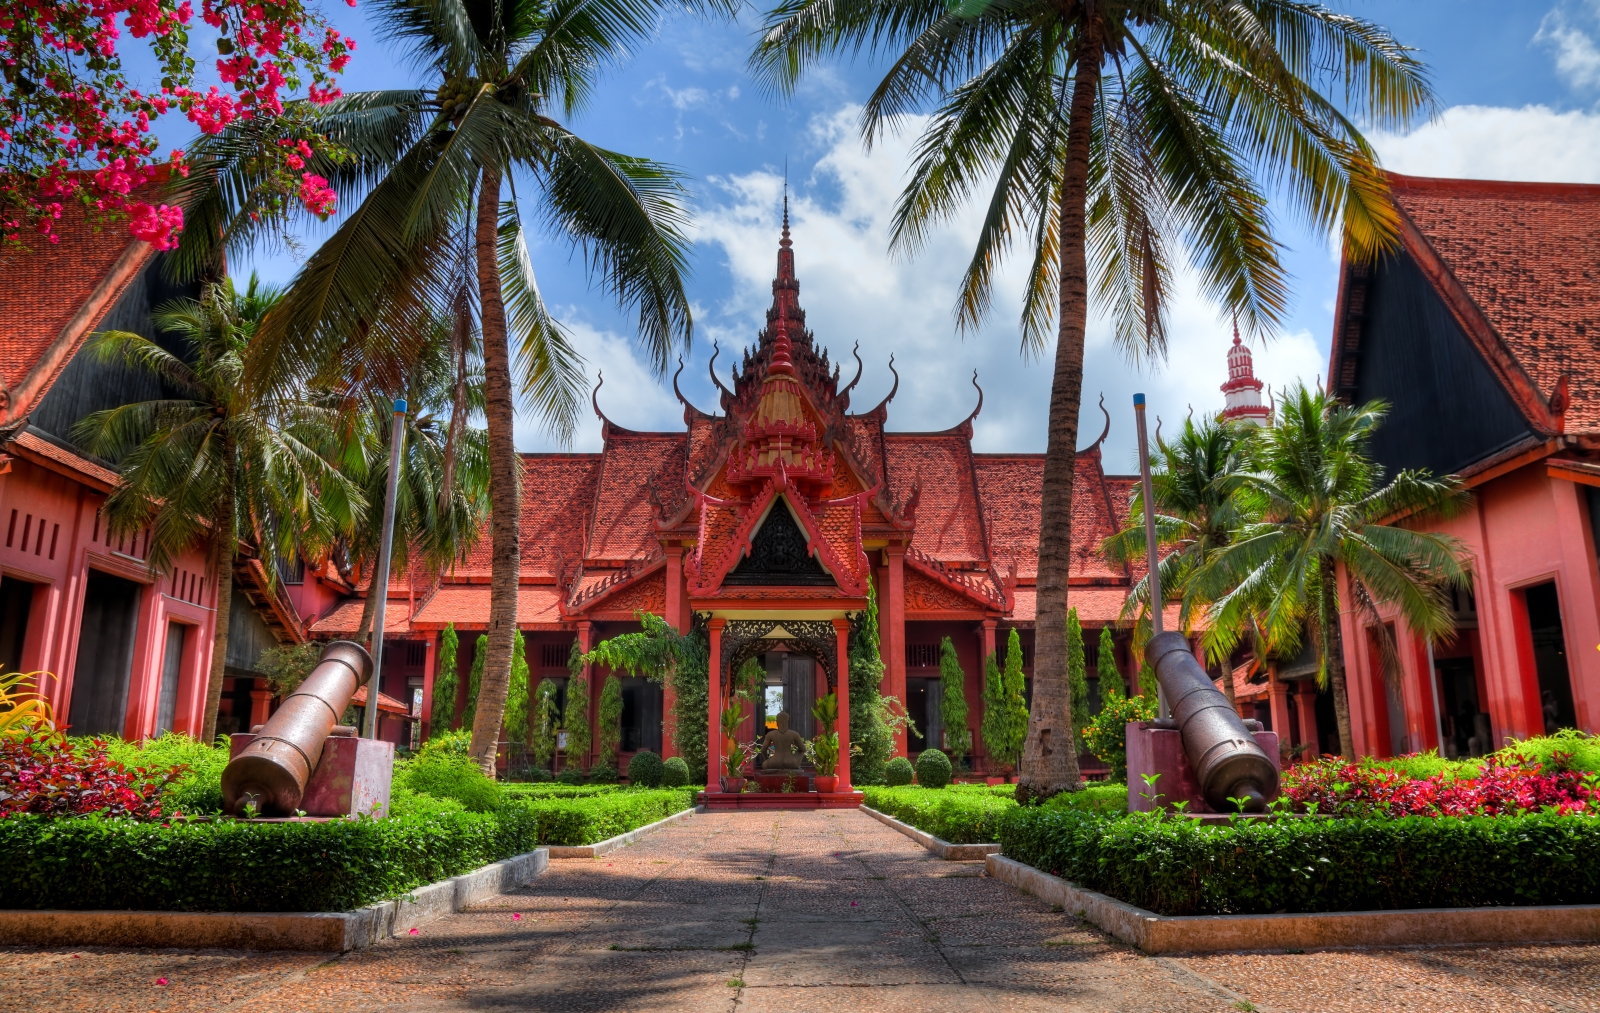 Red bricked building with ornate designs, palm trees line the path